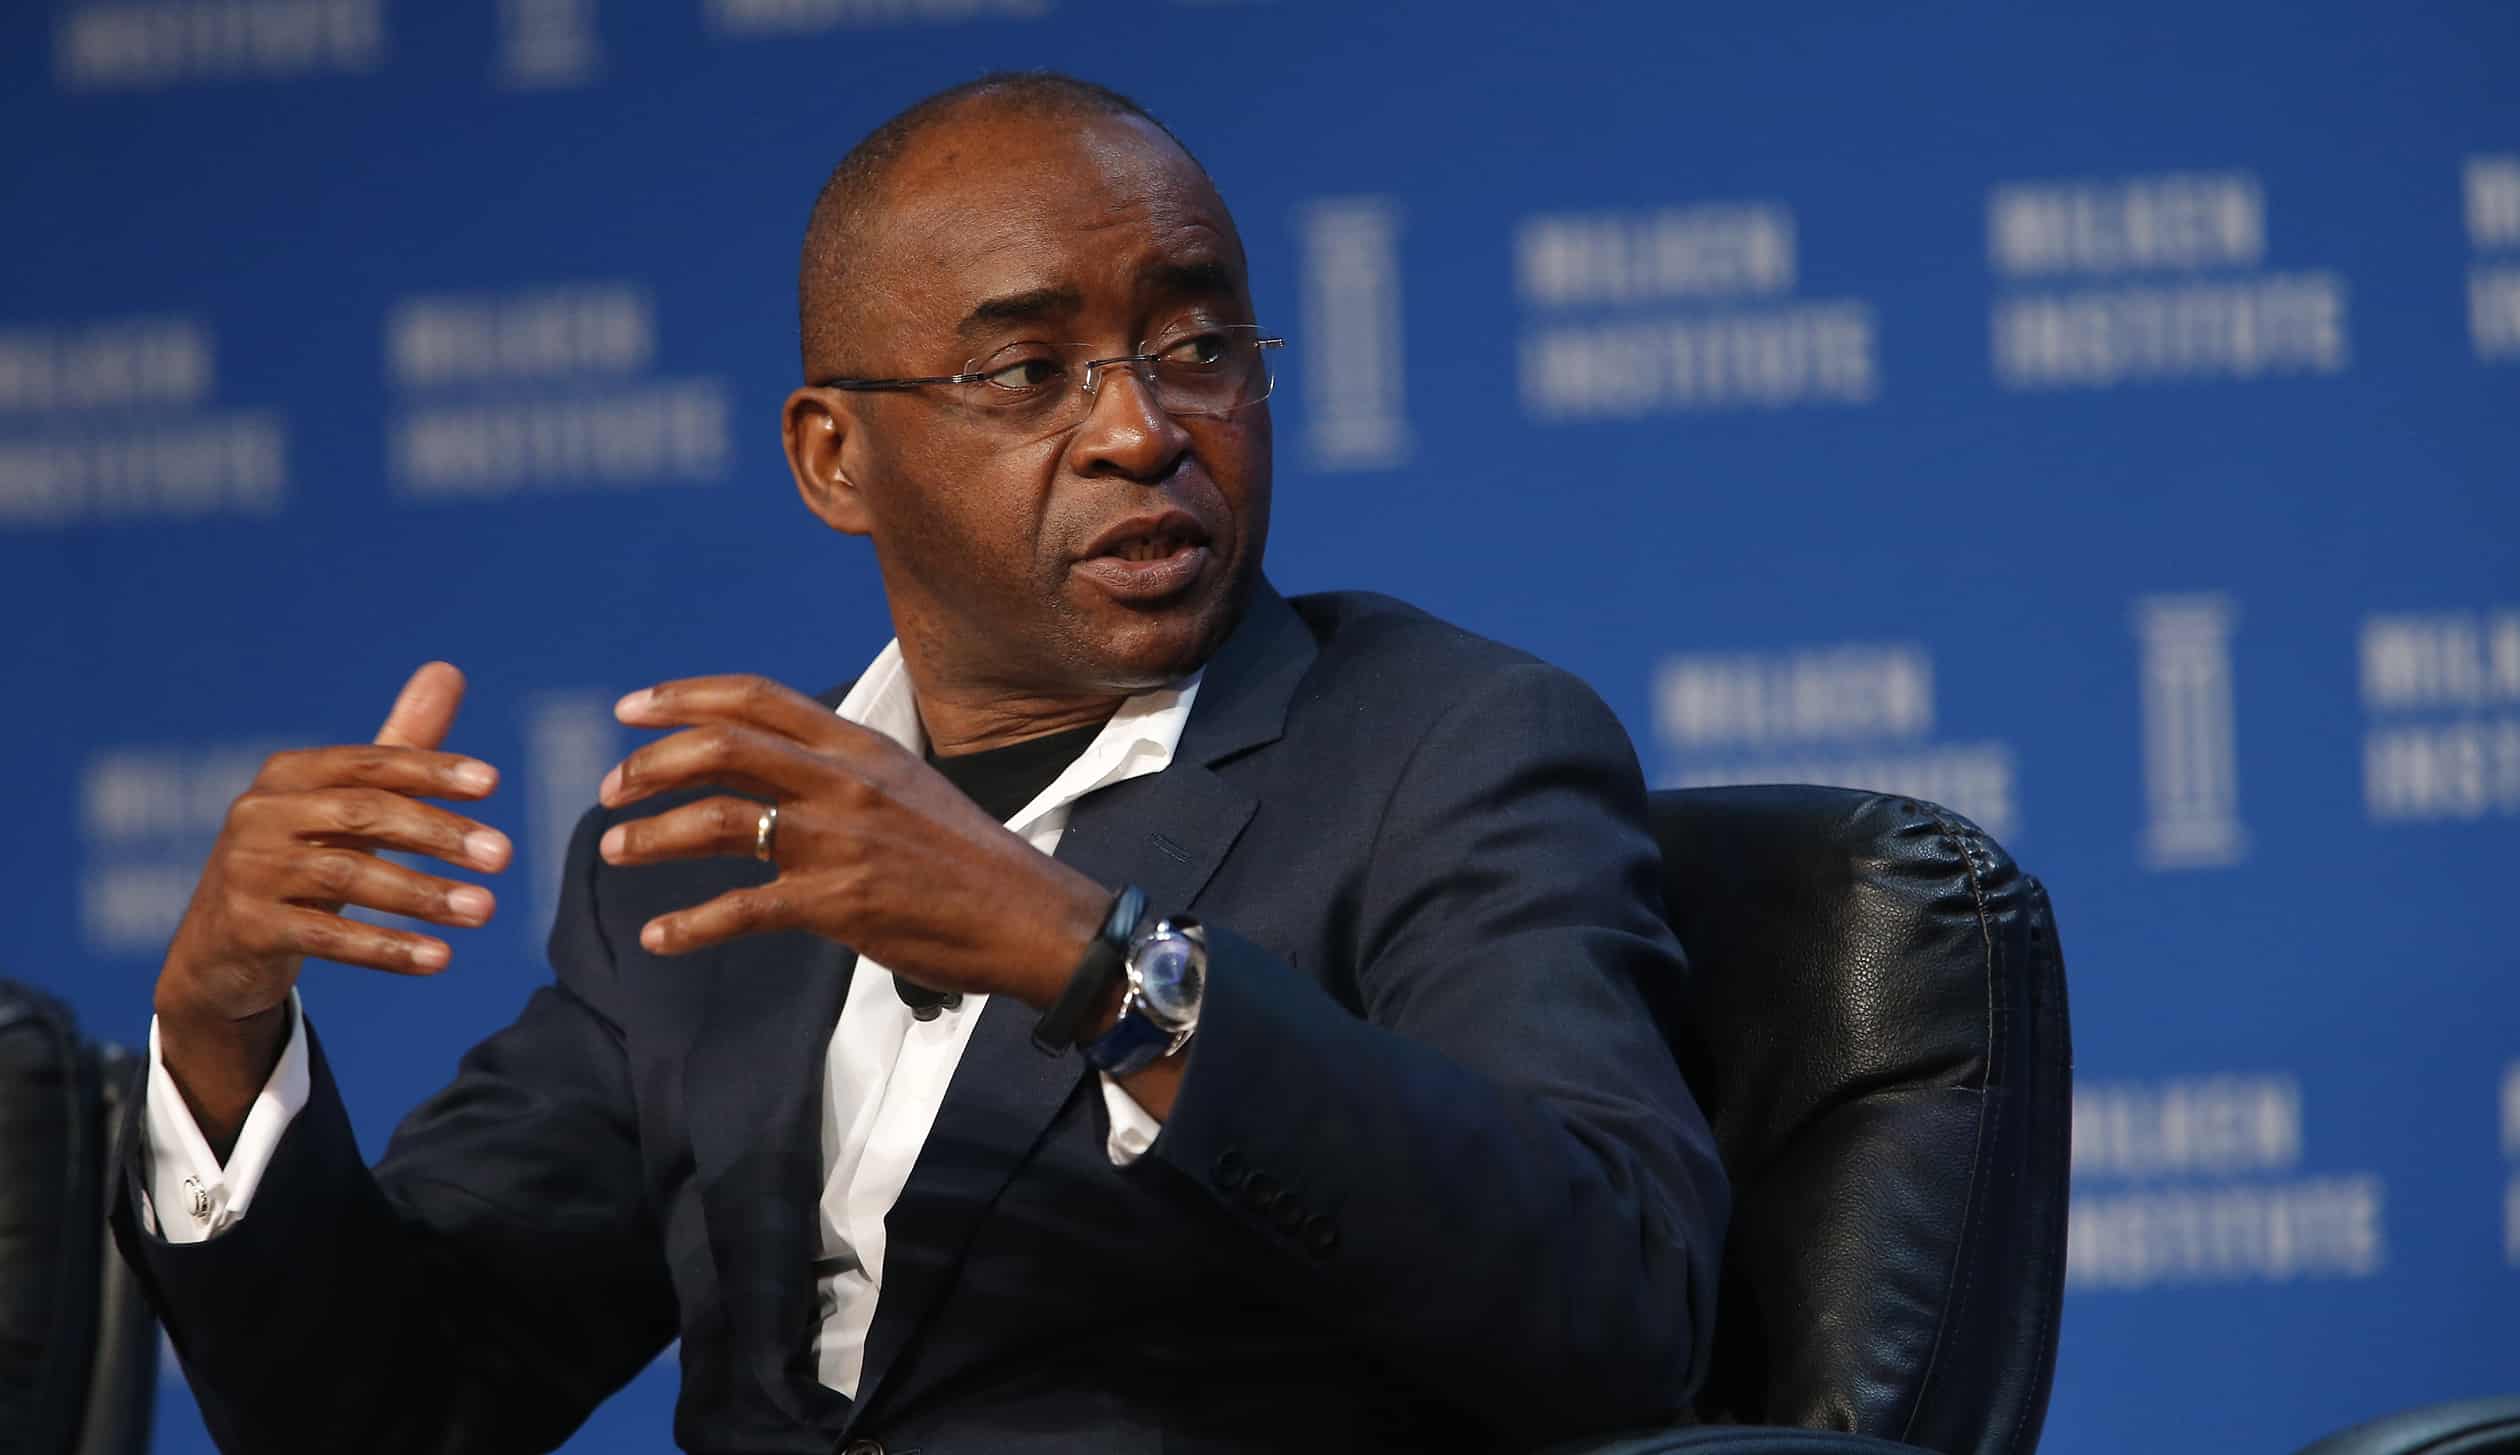 Masiyiwa bemoans ‘restrictive’ access for African countries wanting to procure own vaccines